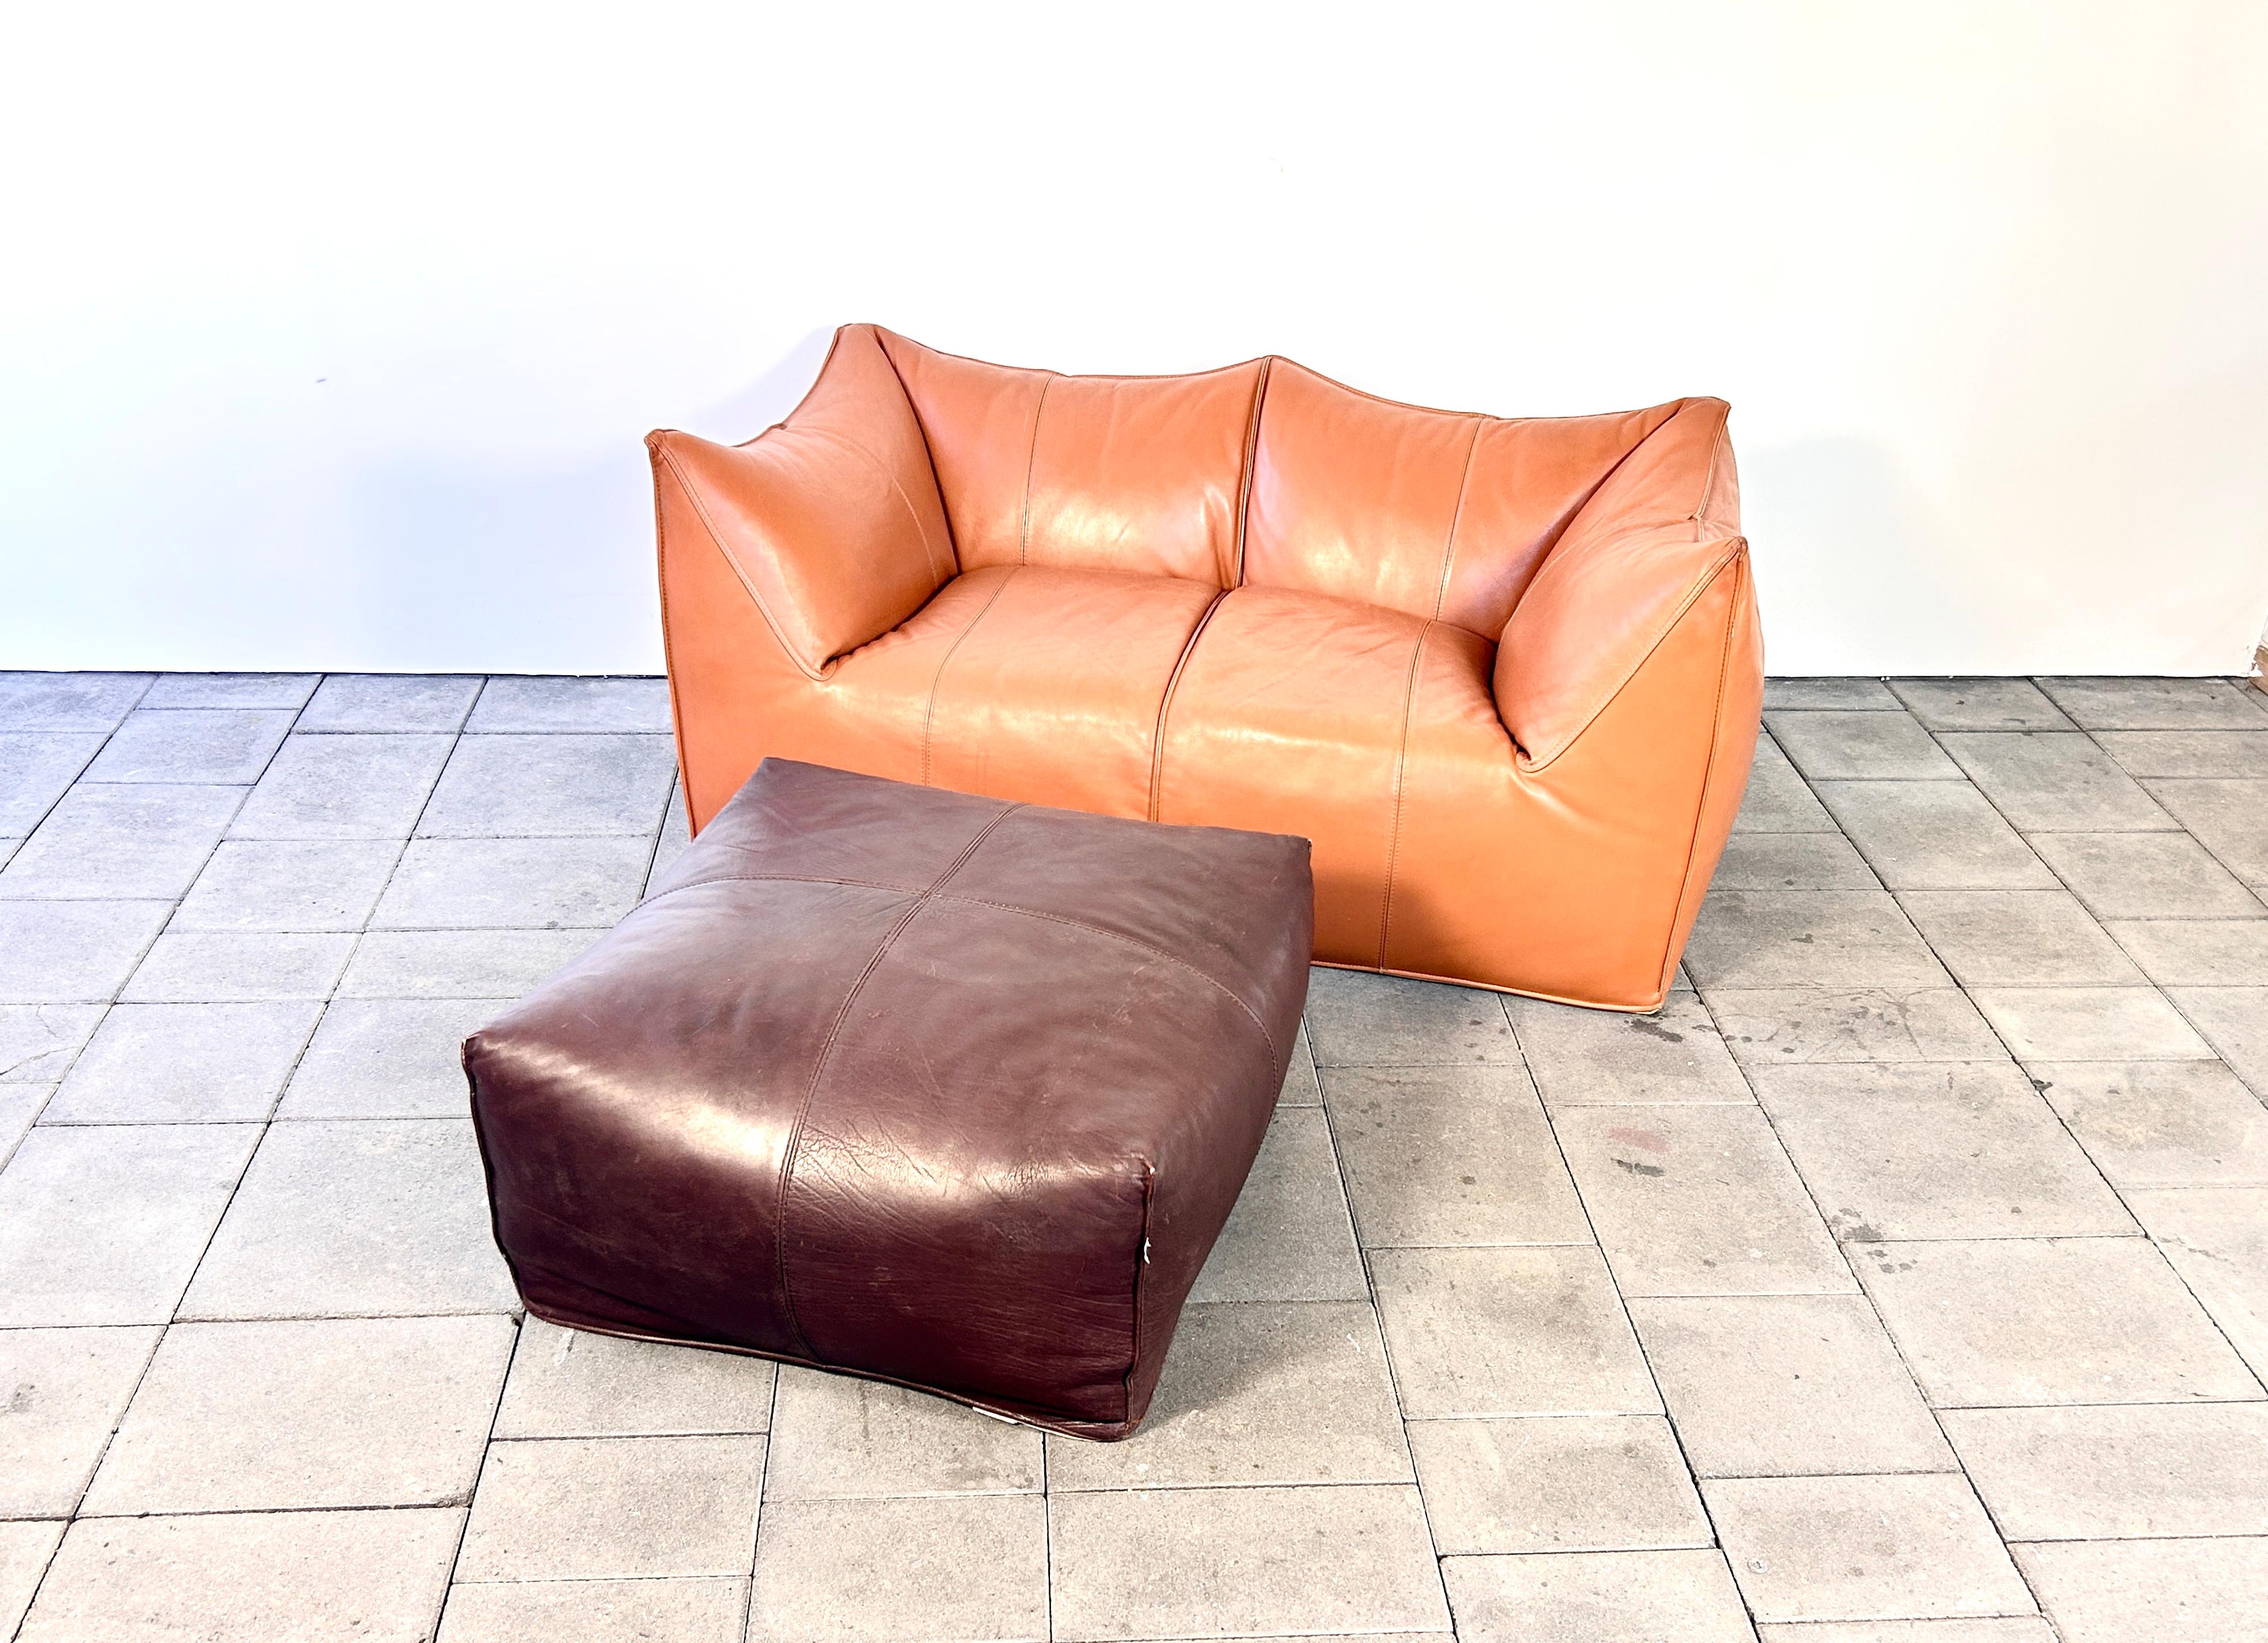 Le Bambole leather pouf or foot rest, designed by Mario Bellini for B&B Italia.

Price for the foot rest only ! The Le Bambole Sofas are available in our parallel listings herr on 1stdibs. 

The Bambole series today is an icon of 1970s design